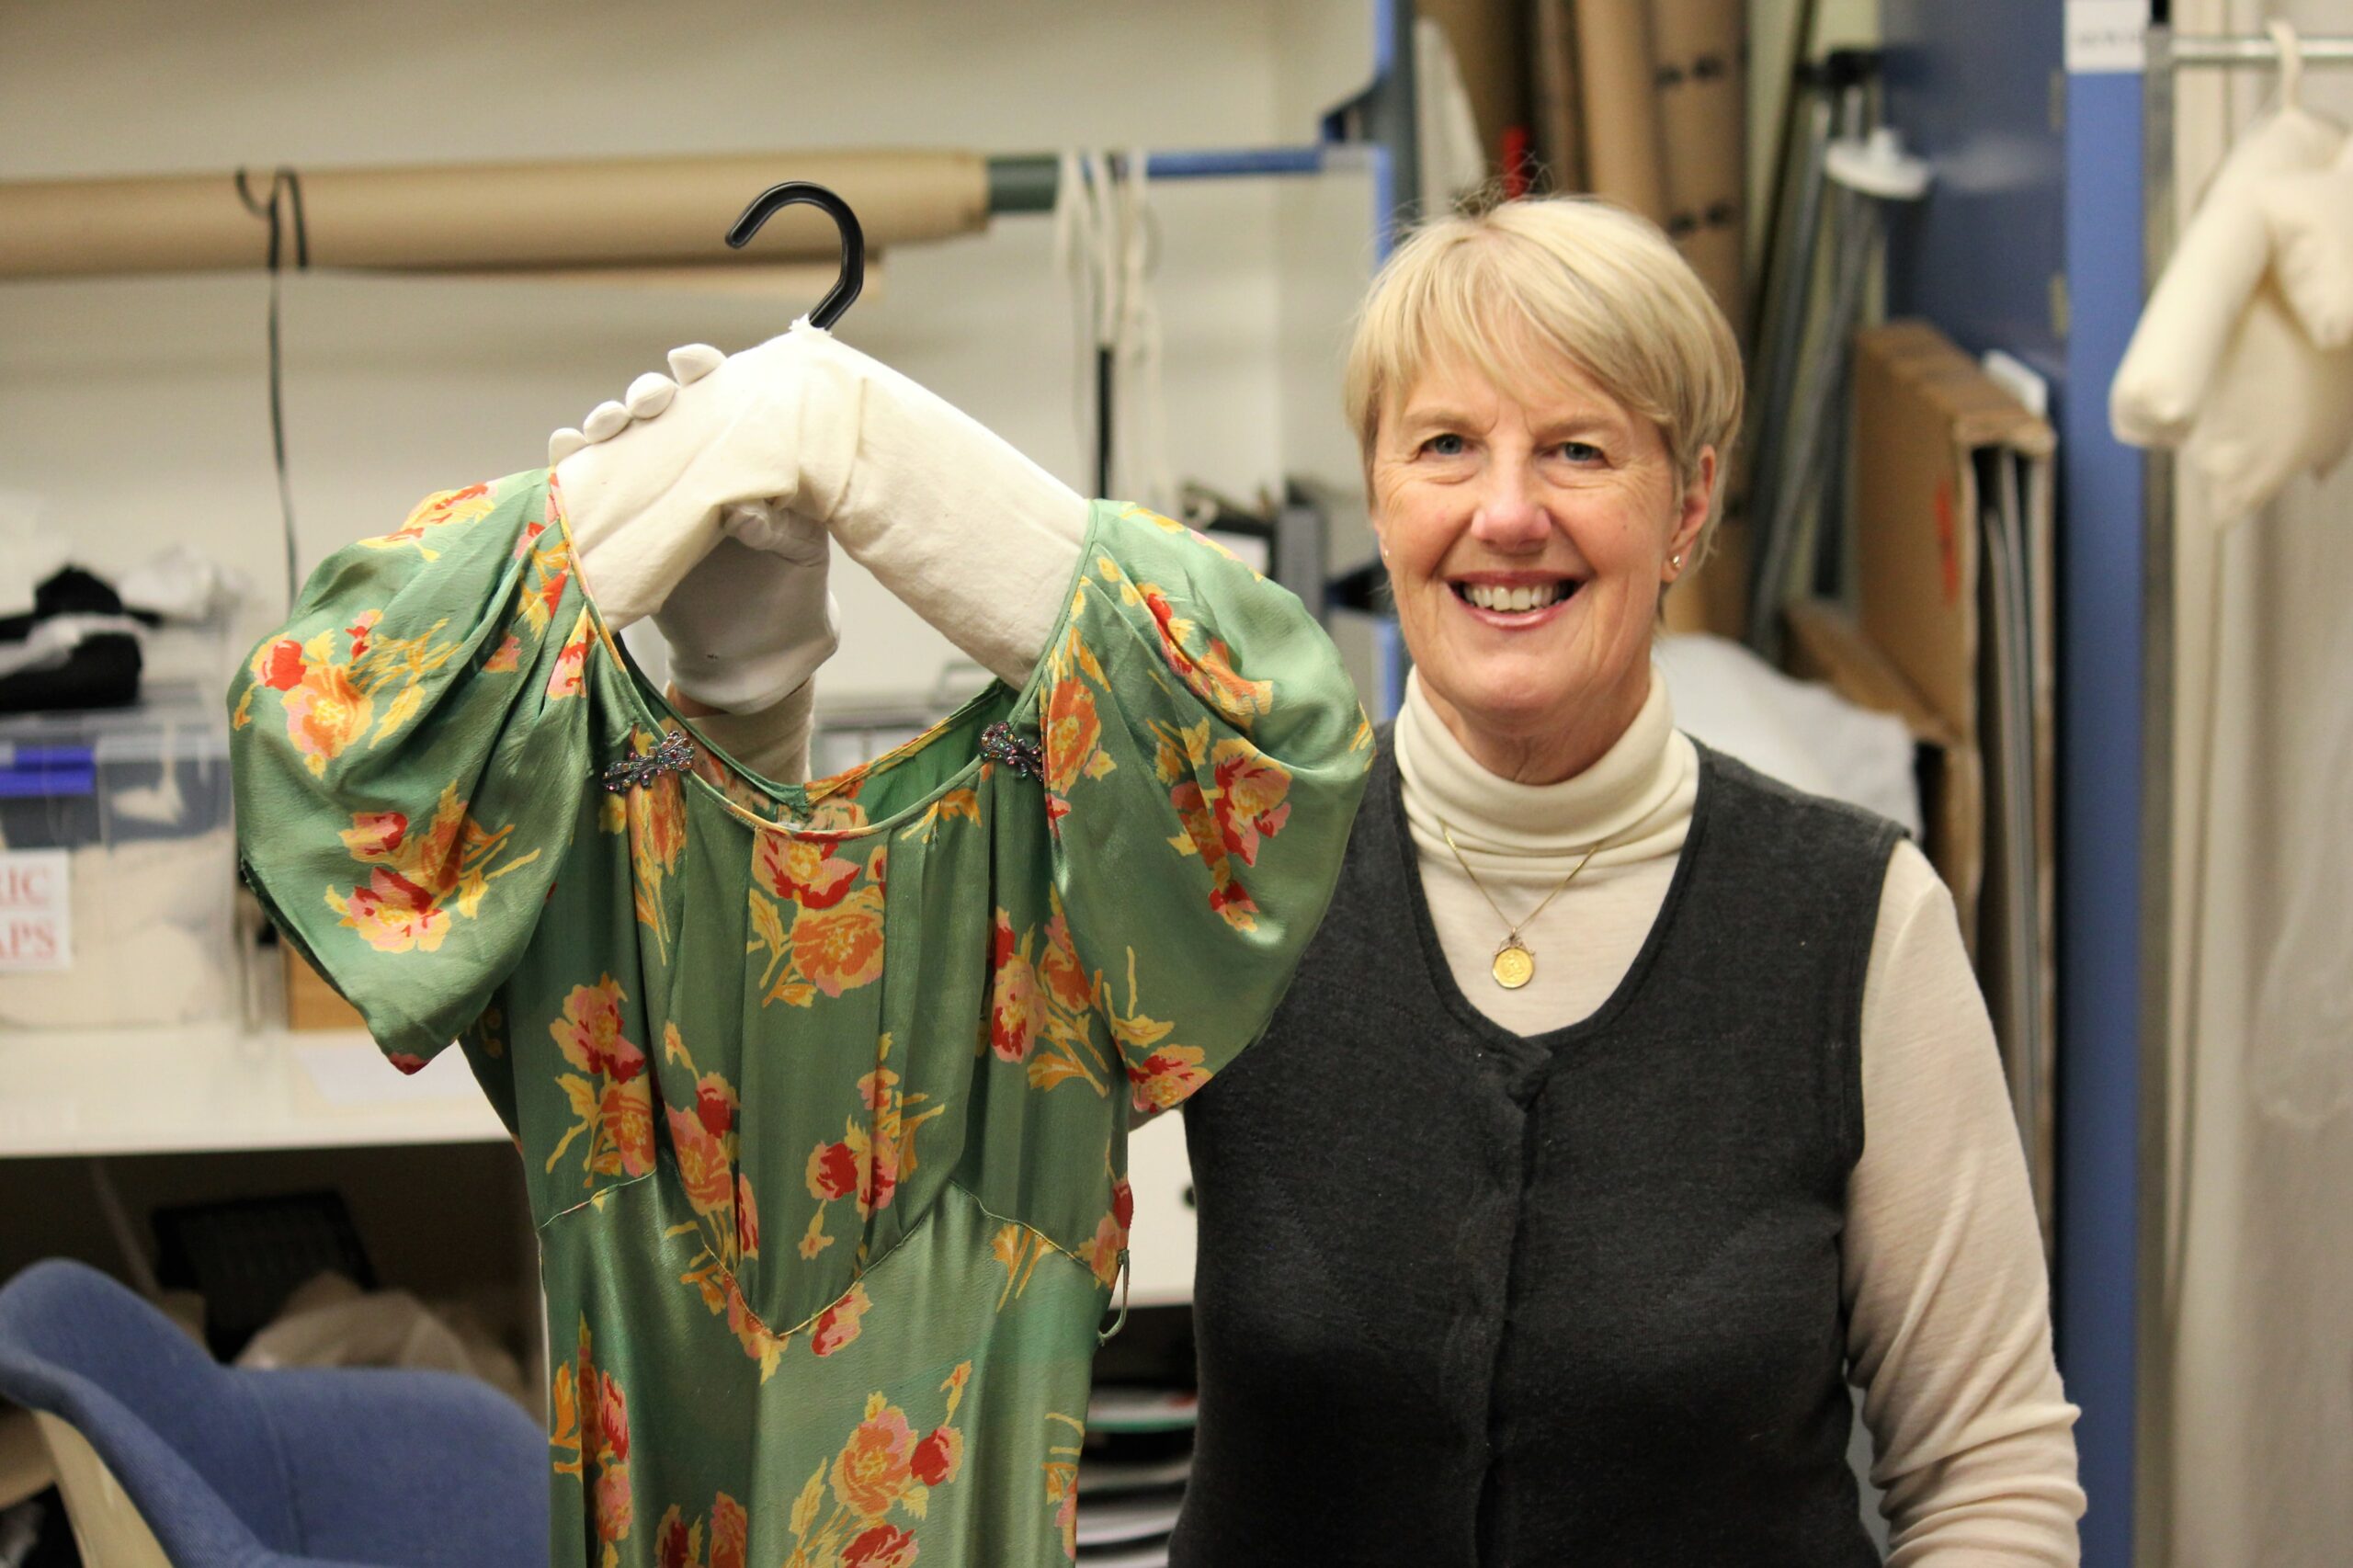 Featured image for “Meet the Museum Team: Kathy Greensides, Collection Assistant”